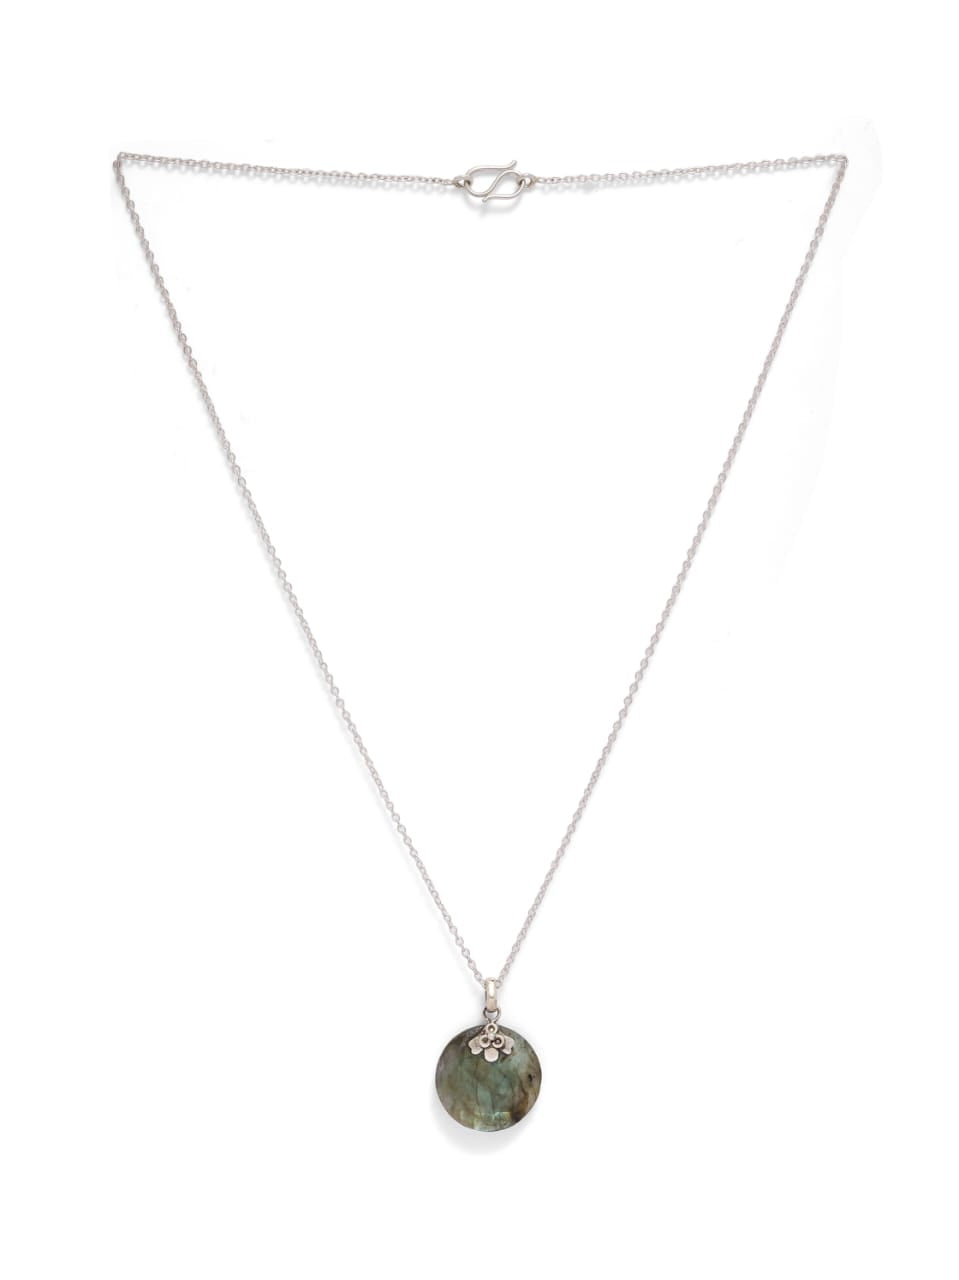 92.5 sterling silver Necklace with faceted labradorite stone in silver work.